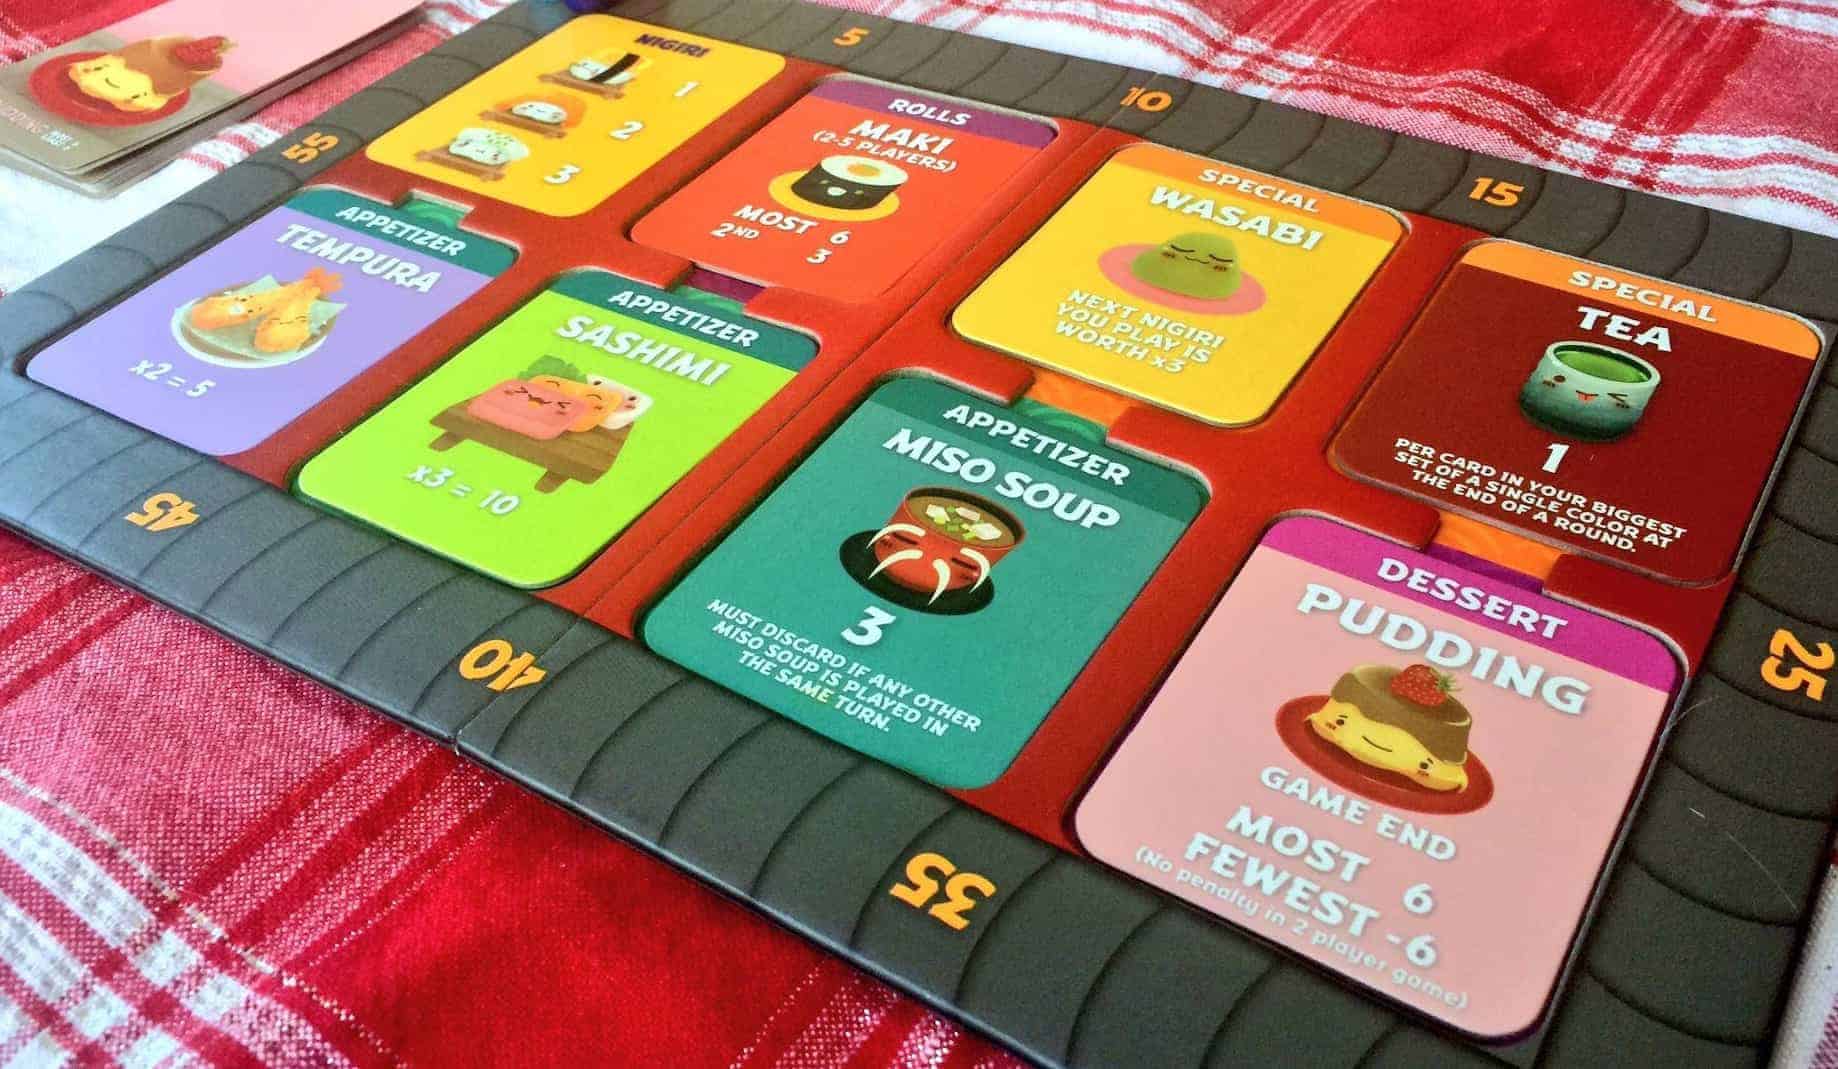 There is an endless amount of good family board games available, but cherry picking the top ones could be tricky. Sushi Go Party is an easy choice.